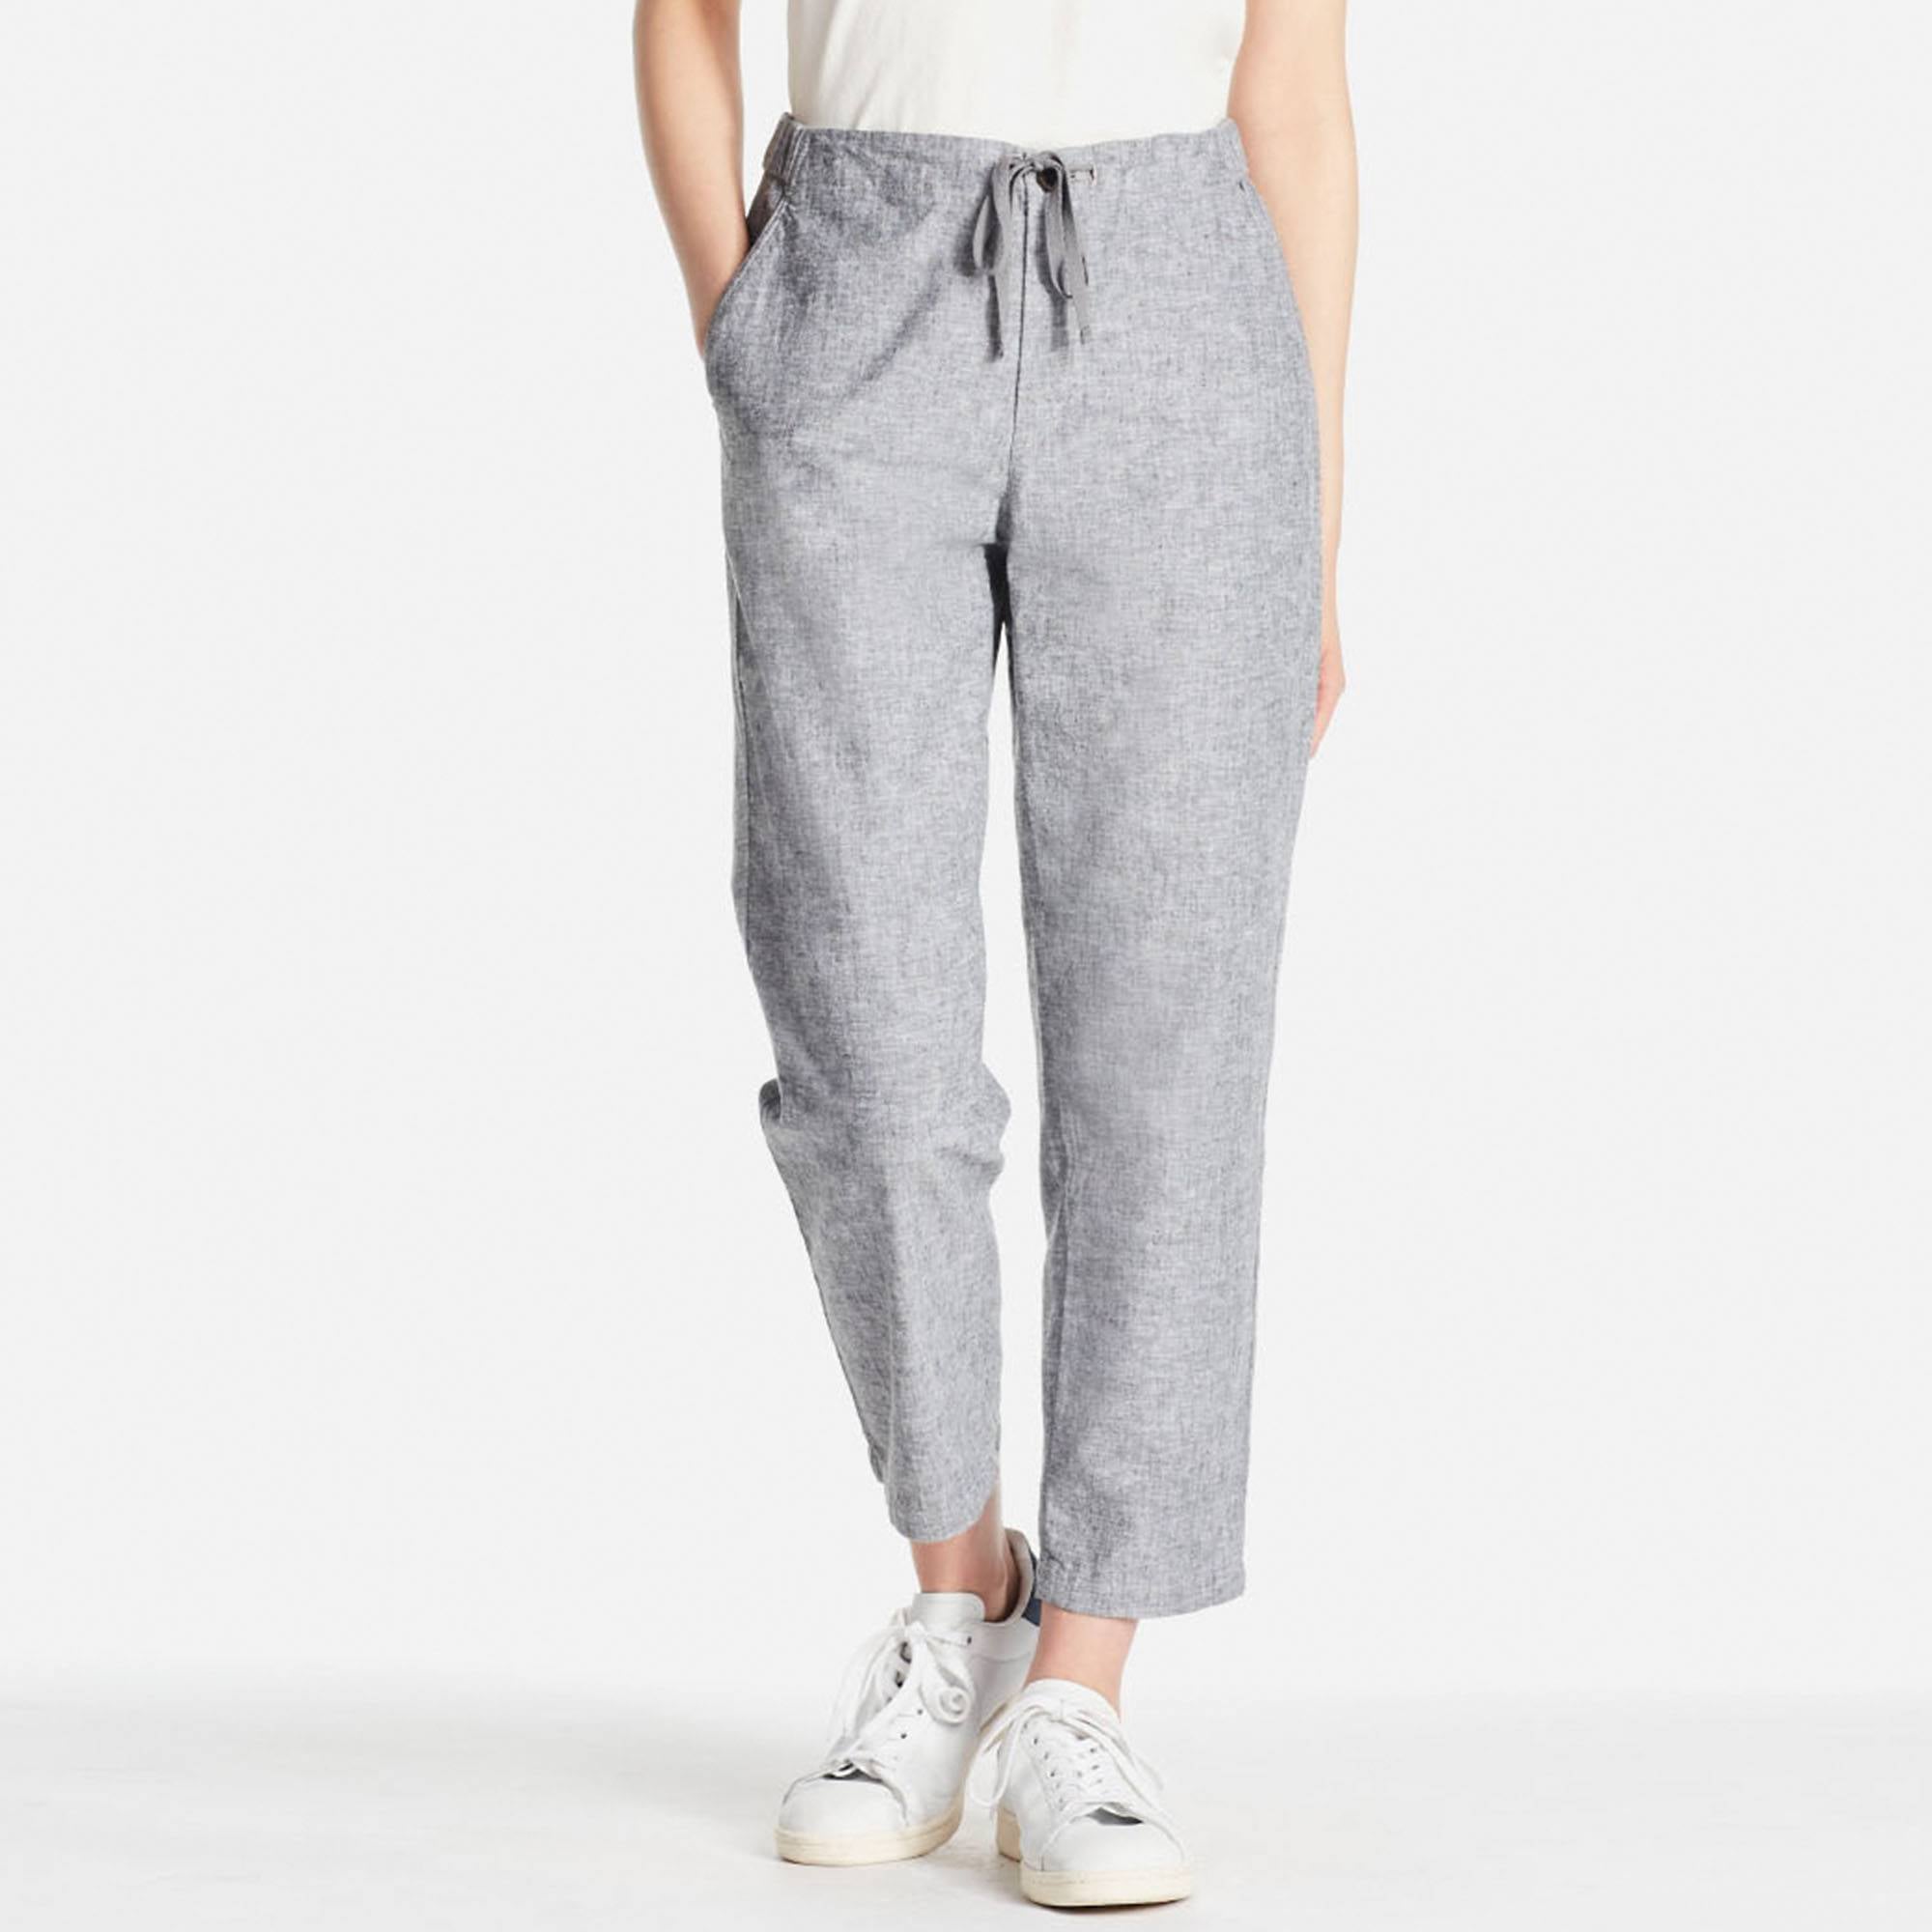 Uniqlo Women Wide-Fit Curved Twill Jersey Pants Review 2020 | The Strategist